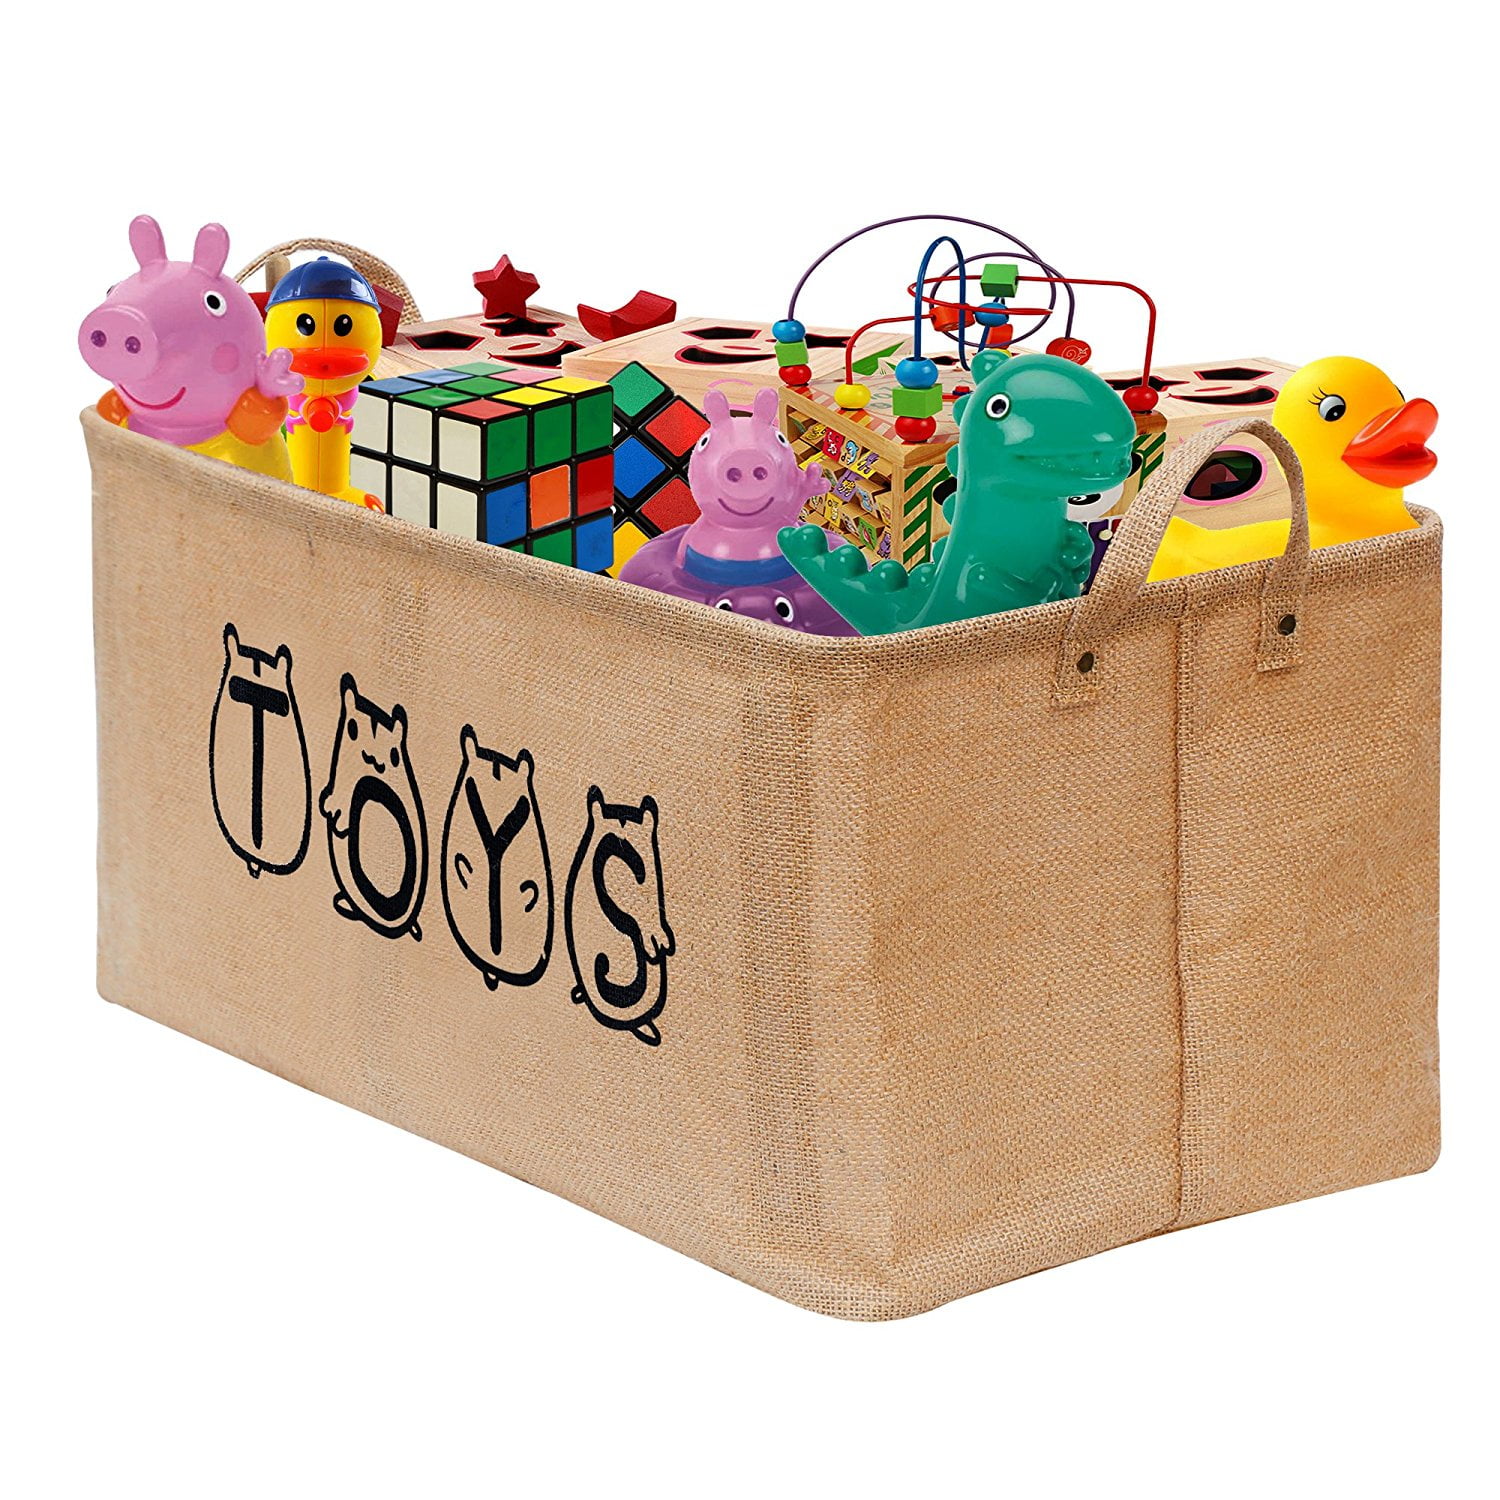 Details about   Large Toy Box Storage Chest Bin Fun Colors Kid Boy Girl Child Playroom Organizer 